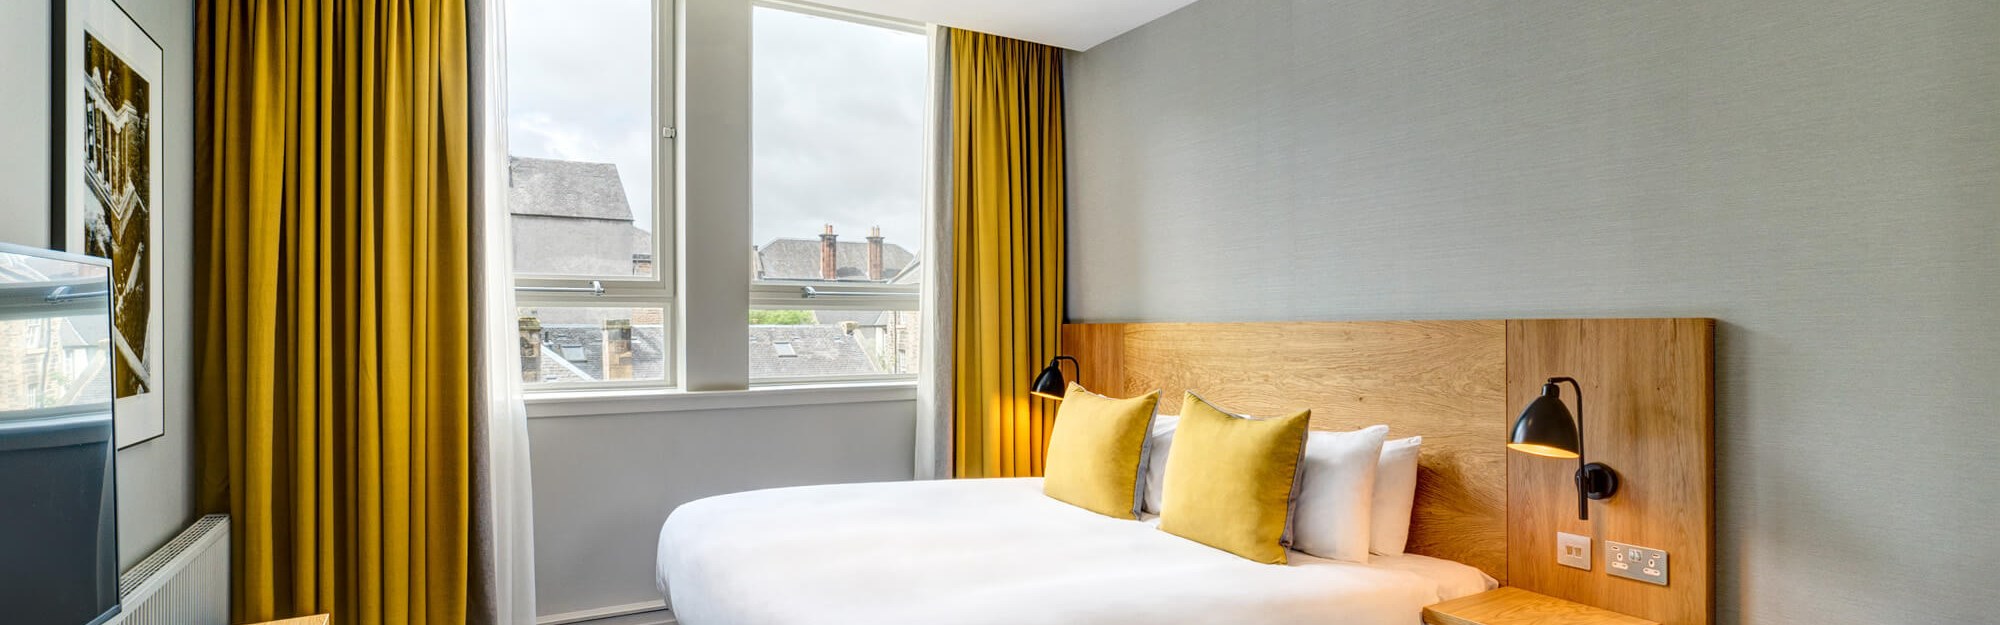 City Room with queen-size bed at Apex Grassmarket Hotel